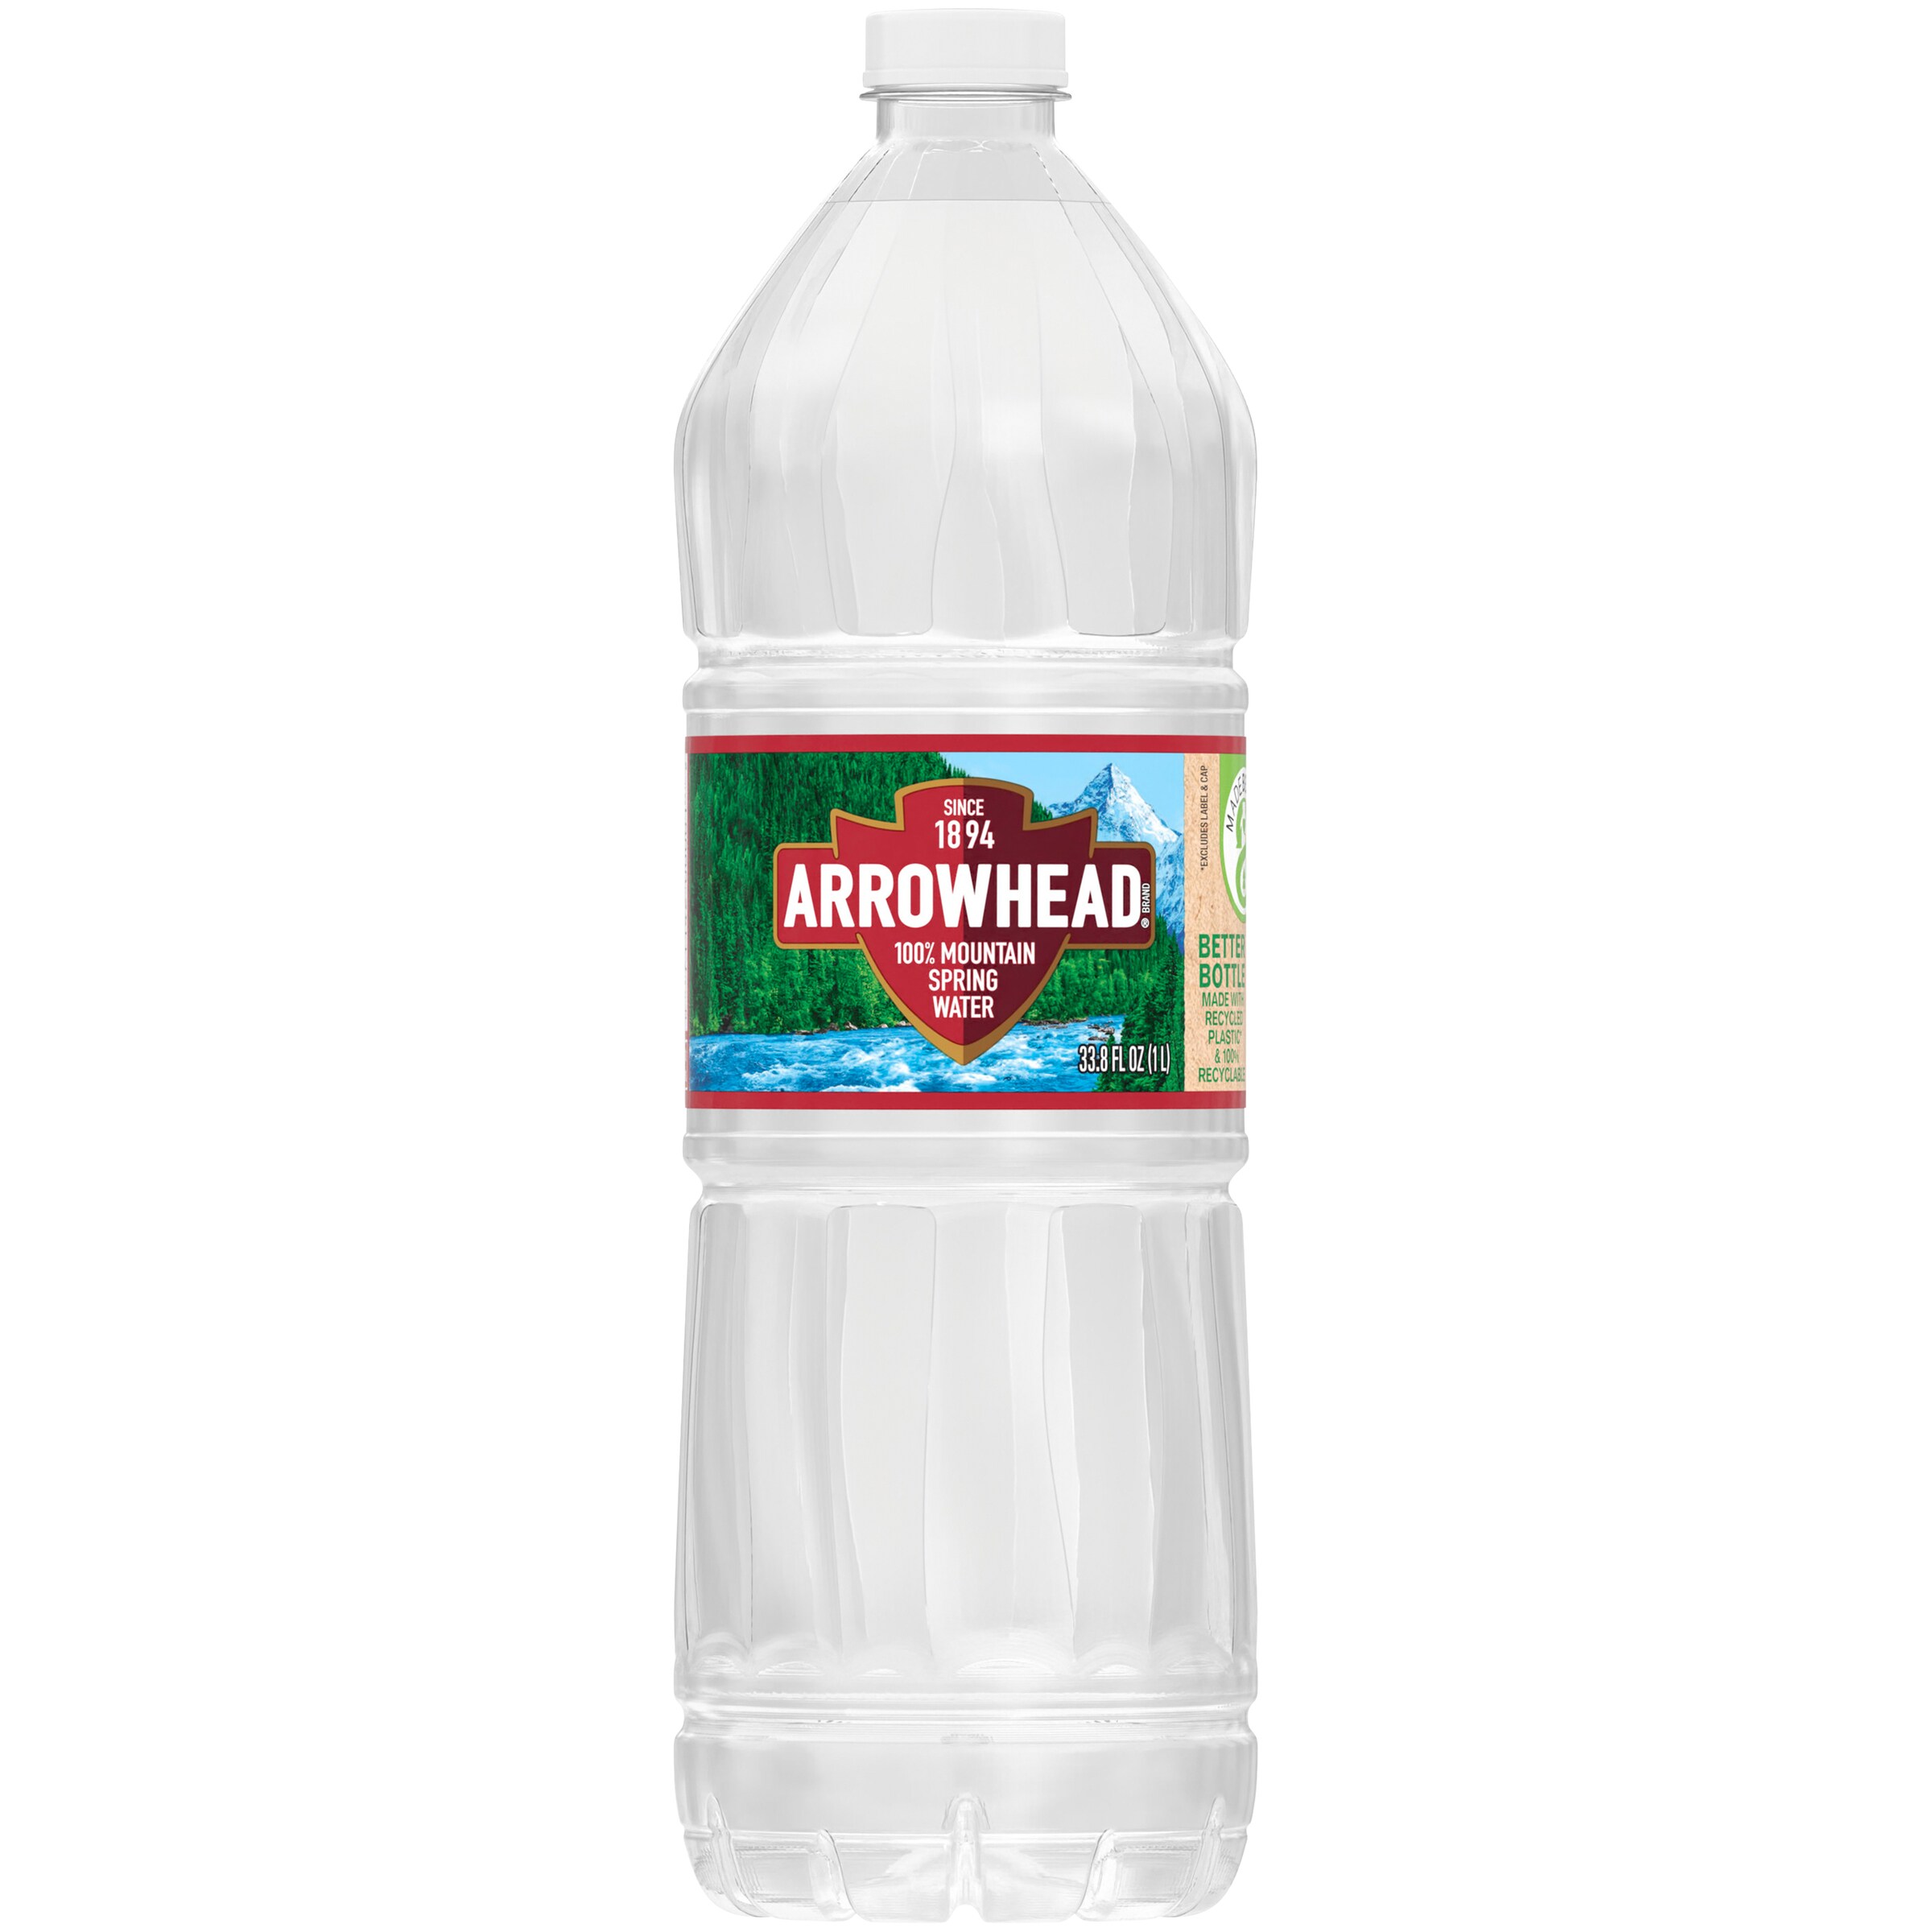 Ice Mountain 100% Natural Spring Water 20oz Bottle - Refreshing and  Eco-Friendly Water in Plastic Container - Enjoy the Crisp Taste of Nature  in the Water department at